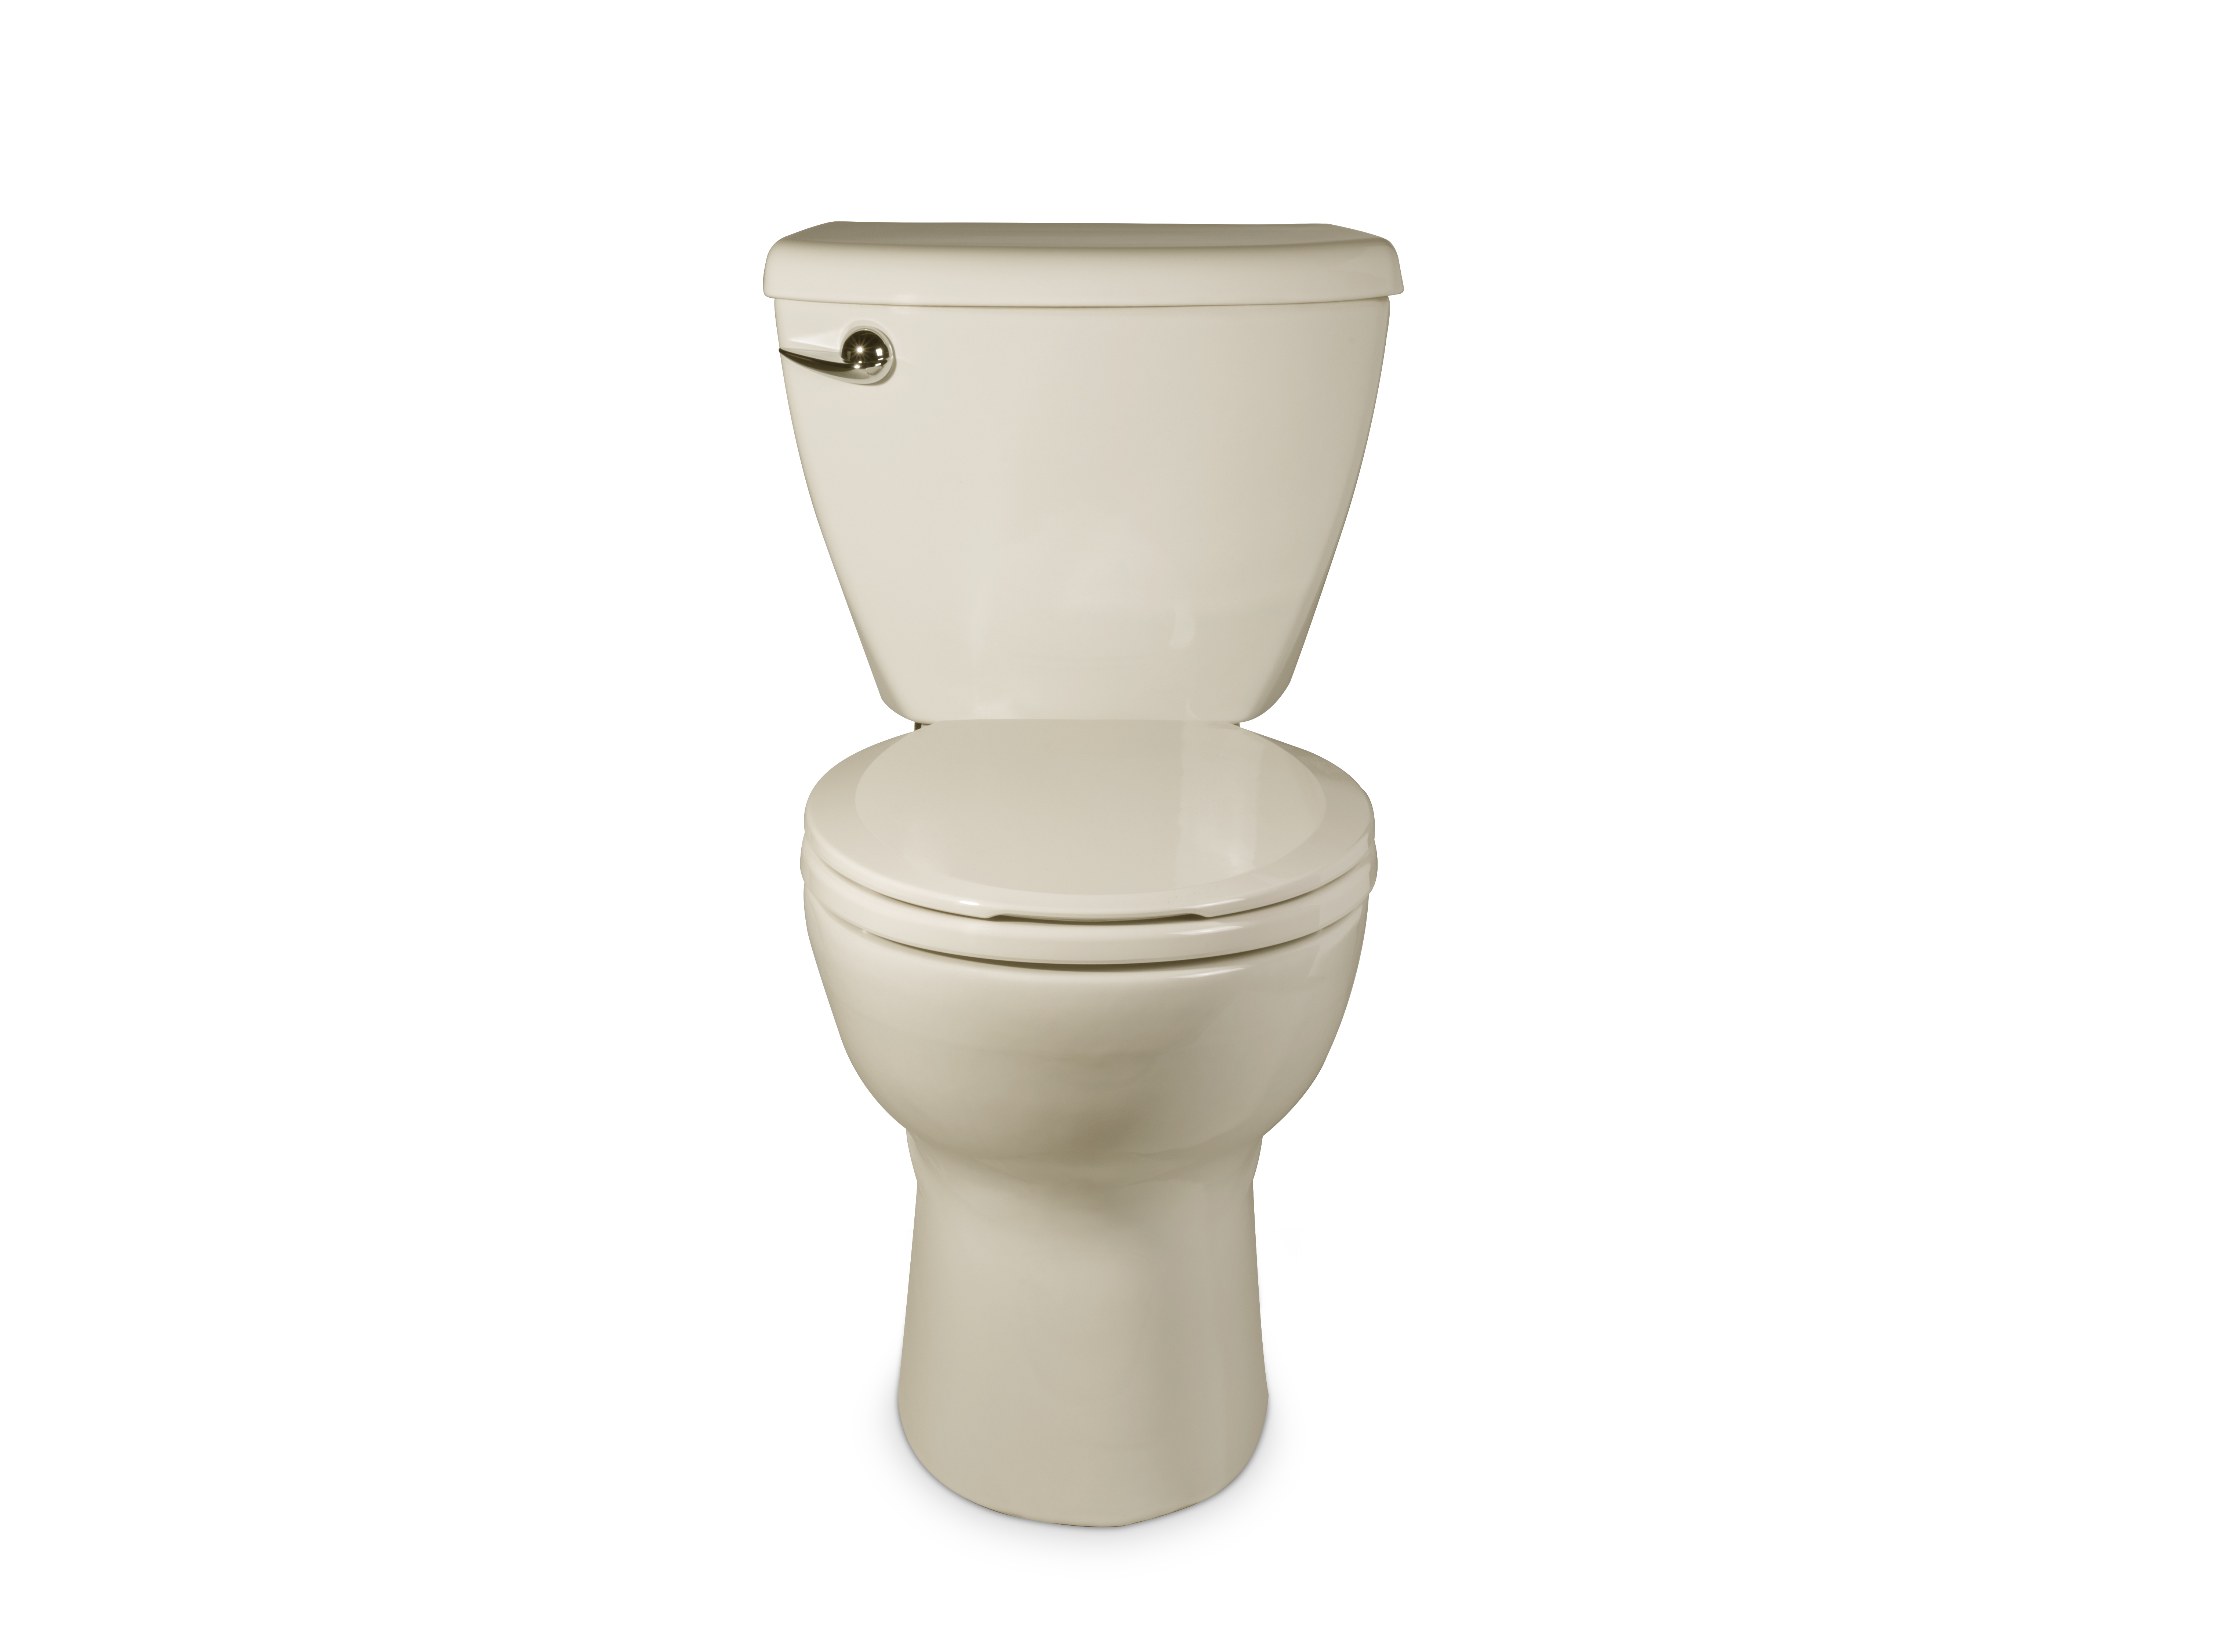 Toilette double chasse, 4/6 L, MaP 1000g